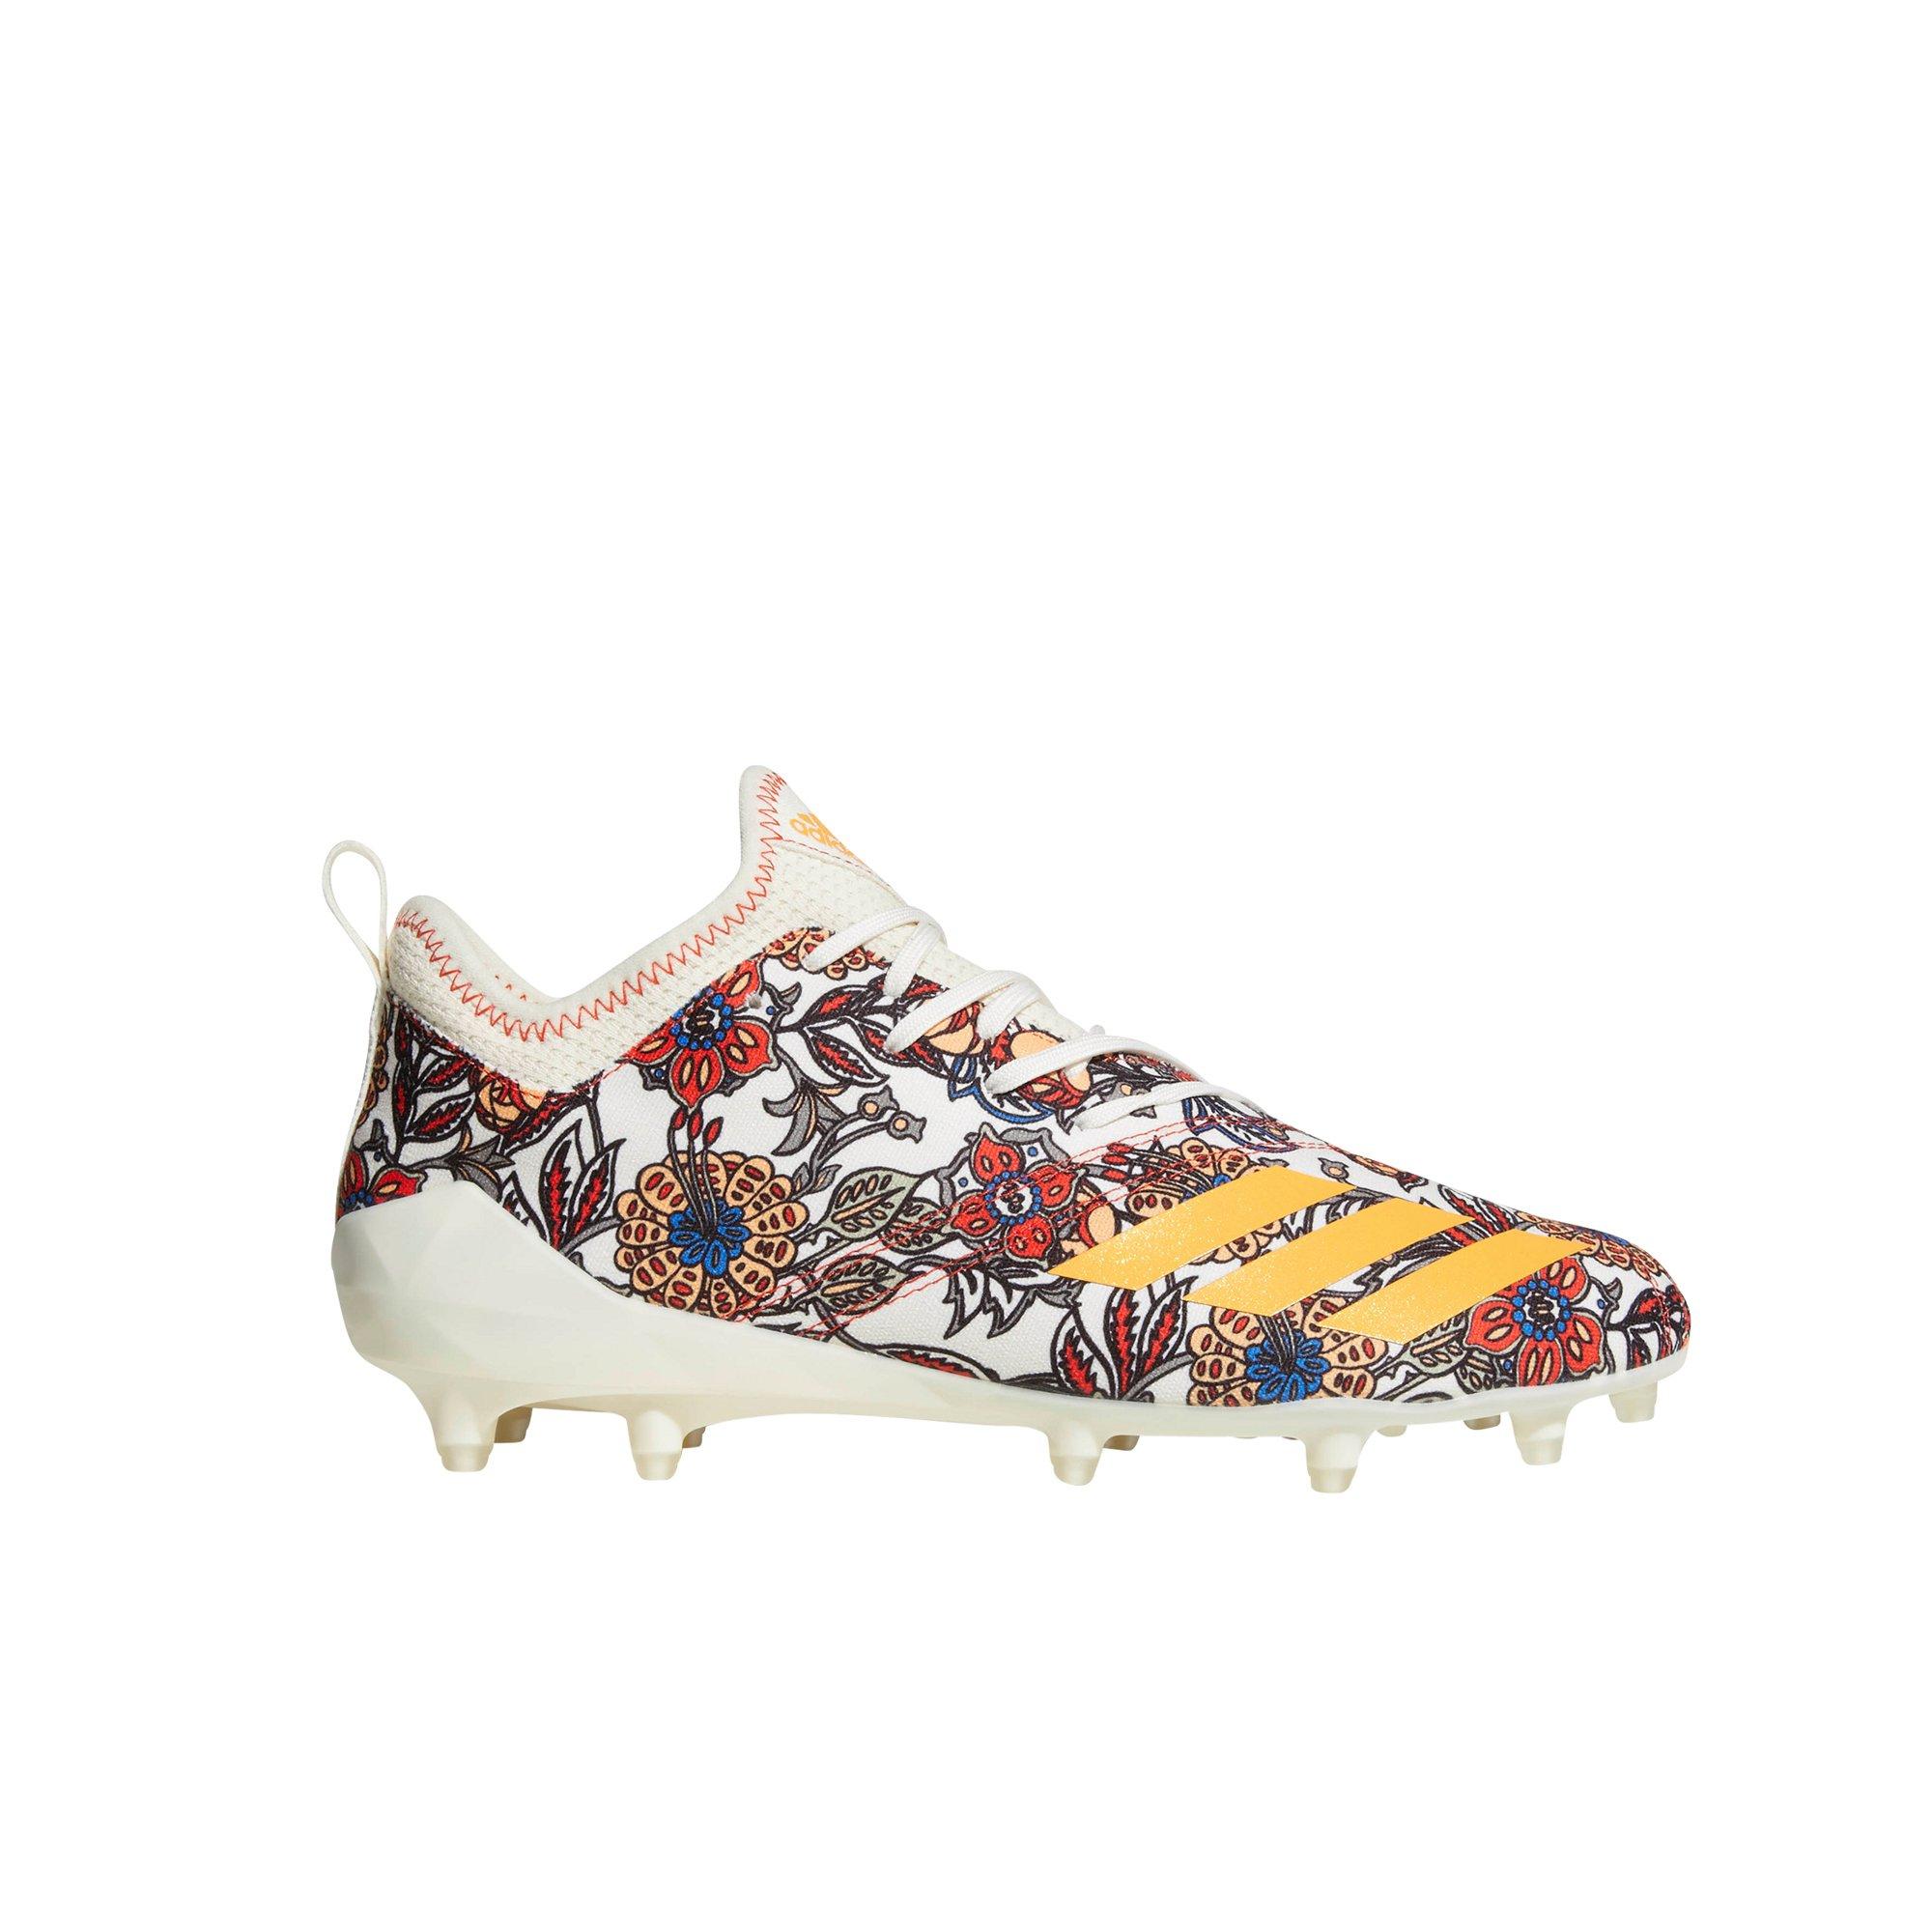 adidas floral cleats - dsvdedommel 